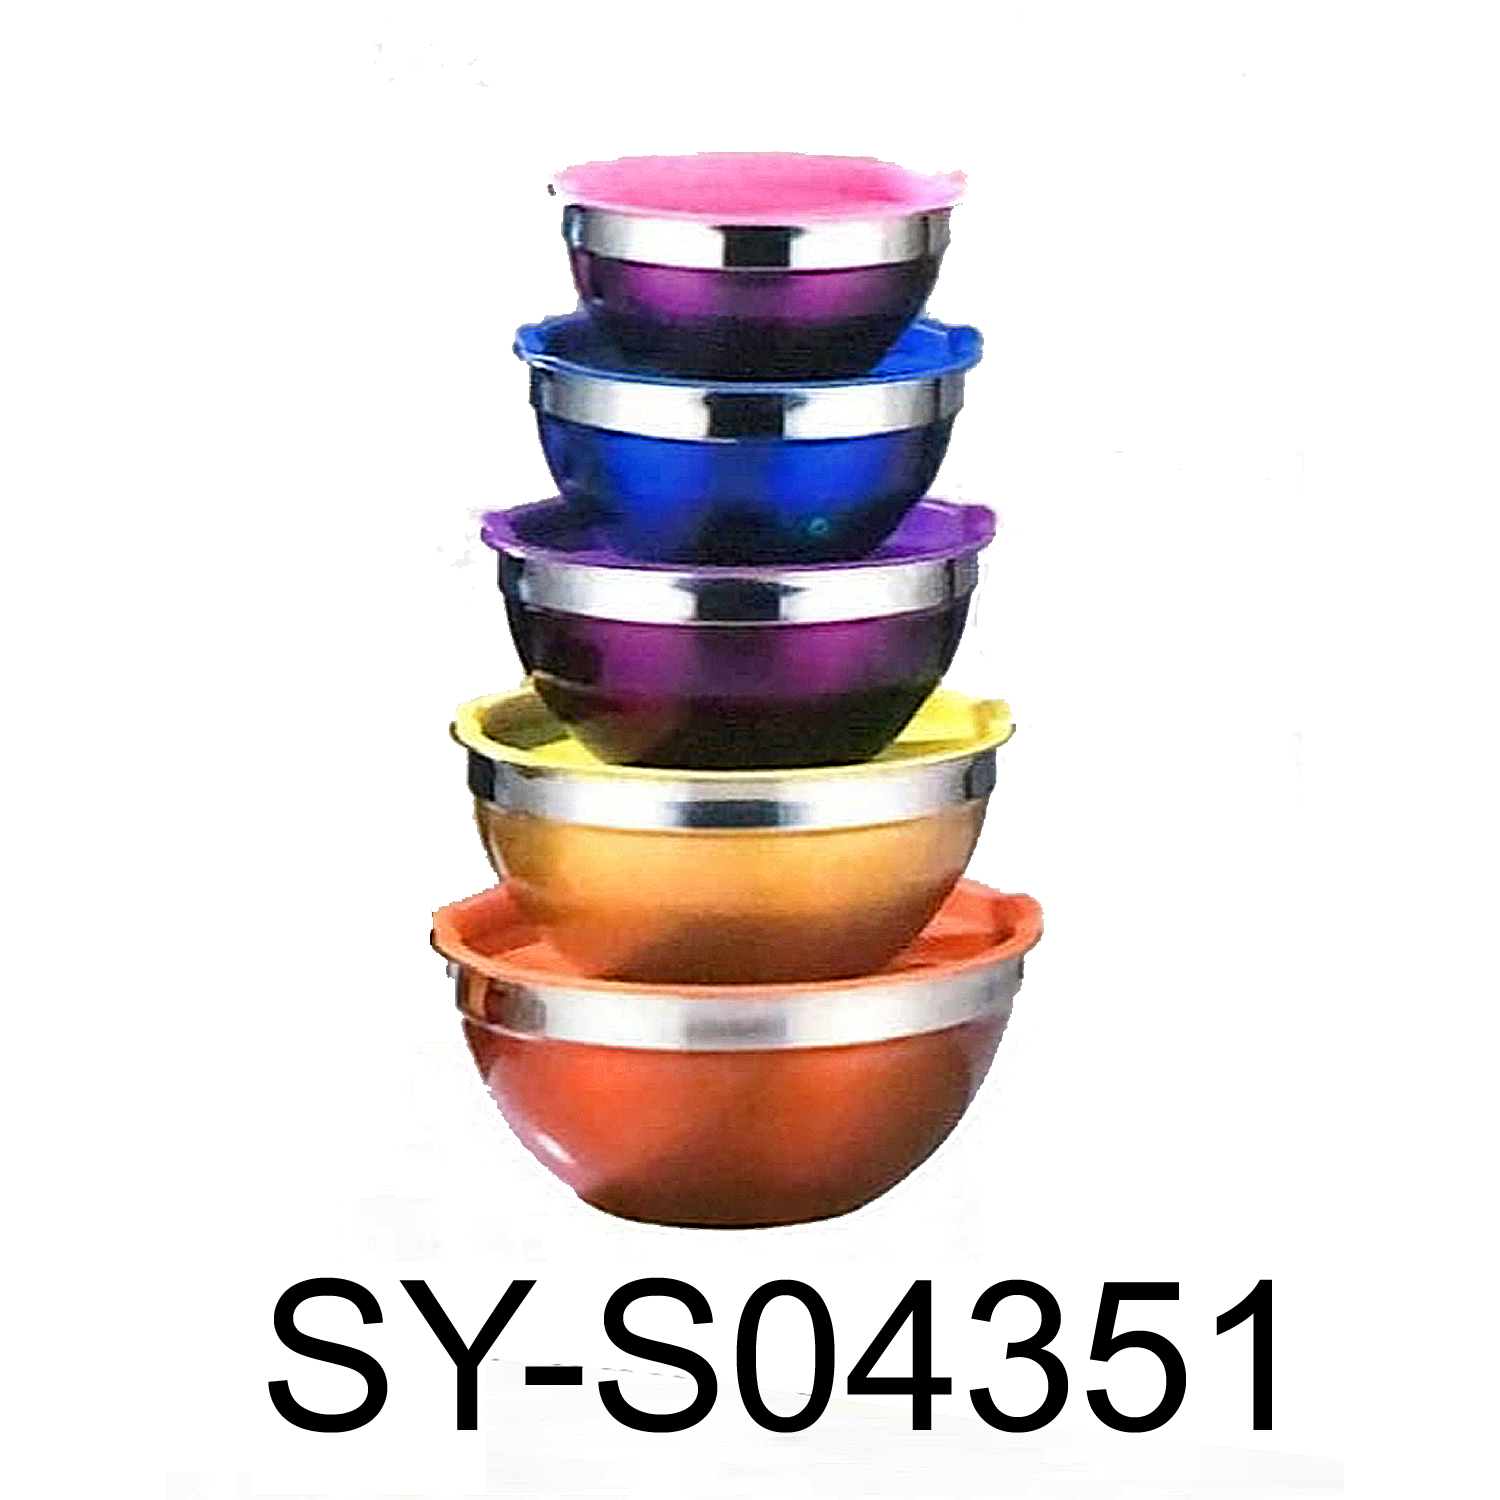 Stainless-Steel Restaurant Mixing Bowls